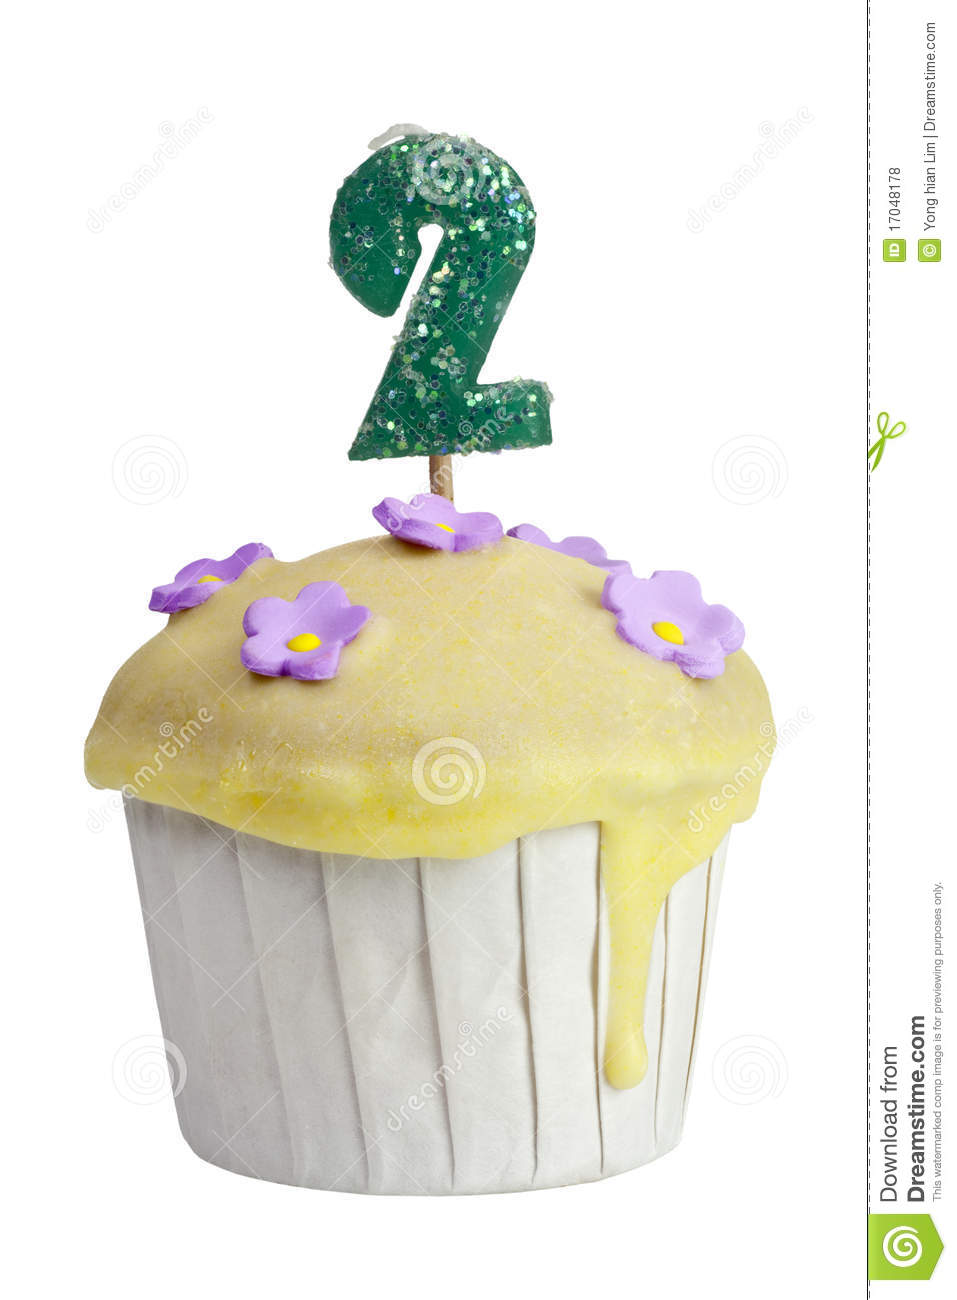 Cupcake With Birthday Candle For Two Year Old Royalty Free Stock